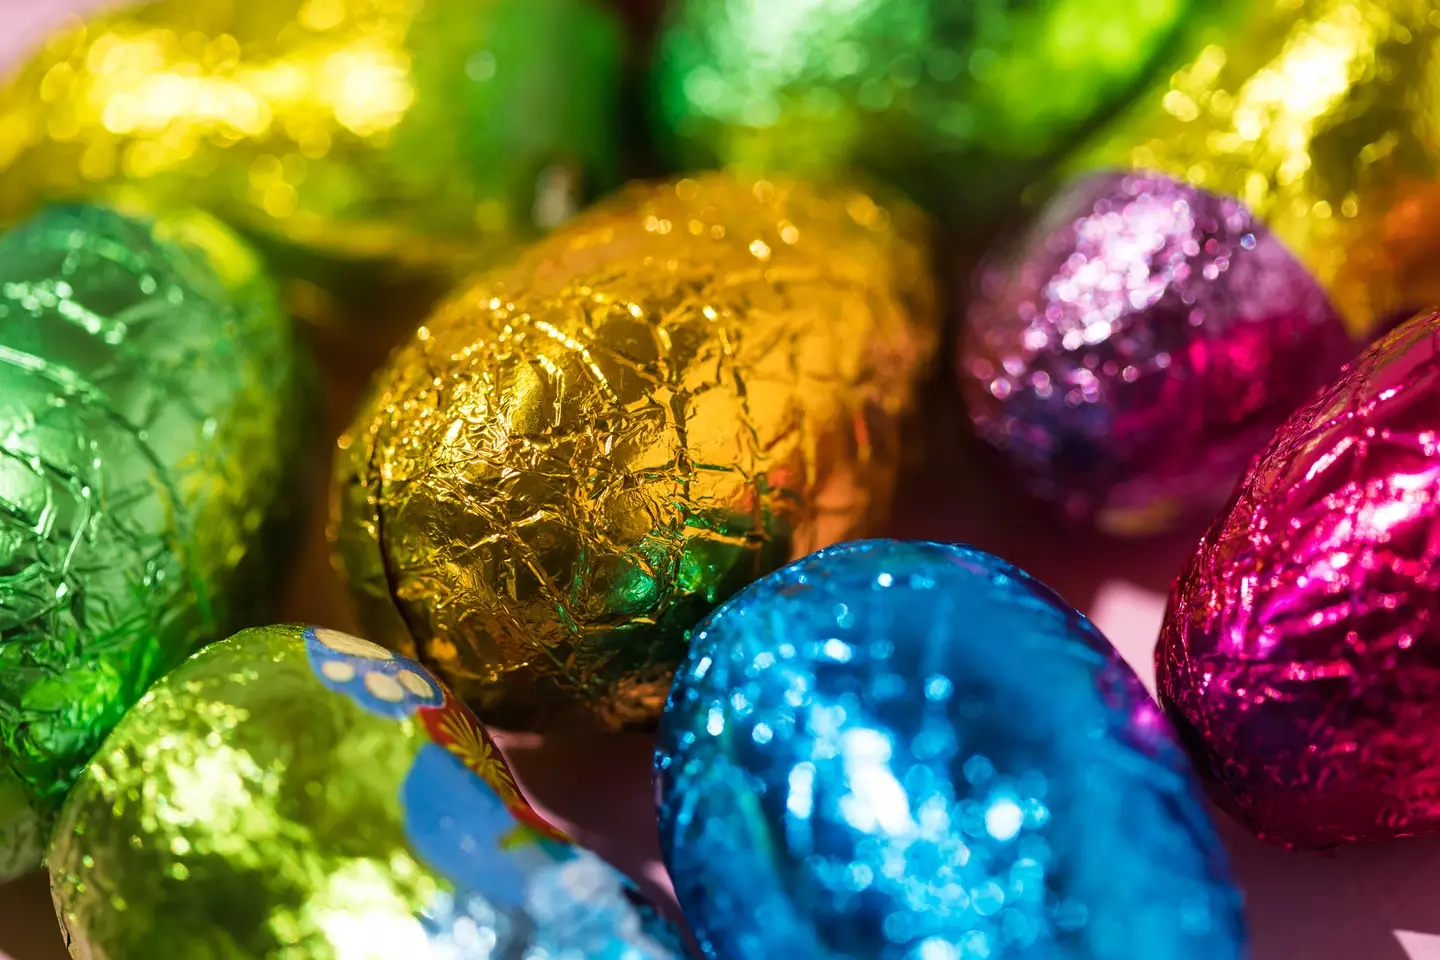 Brits are being warned over chocolate Easter eggs posing as an airport security risk.